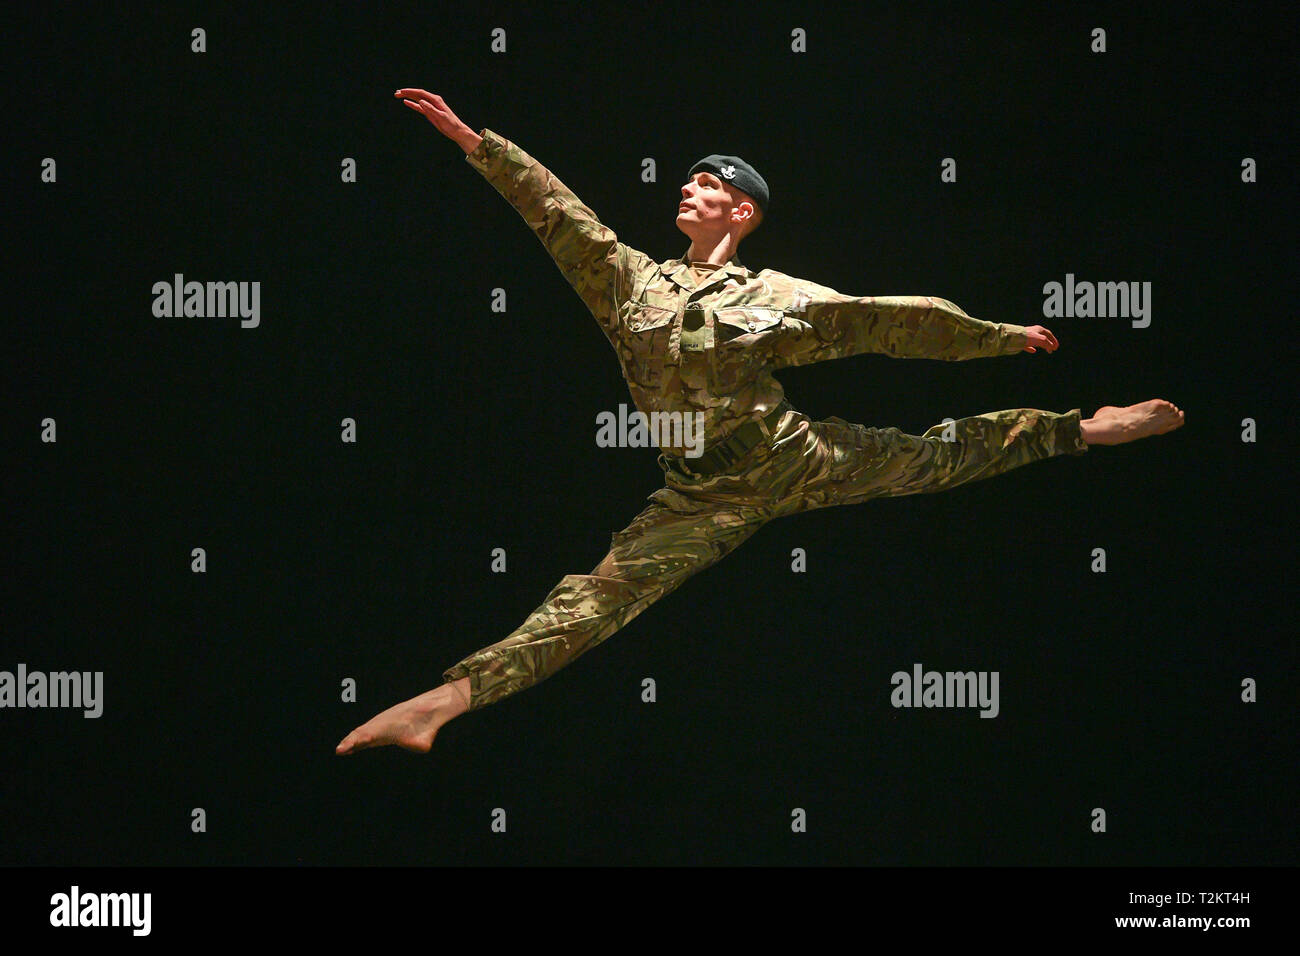 Serving soldier in the British Army, Trooper Alex Smith, 22, of 1st The Queen's Dragoon Guards, leaps into the air during rehearsals for a production called '10 Soldiers' by the Rosie Kay dance company about military life. Stock Photo